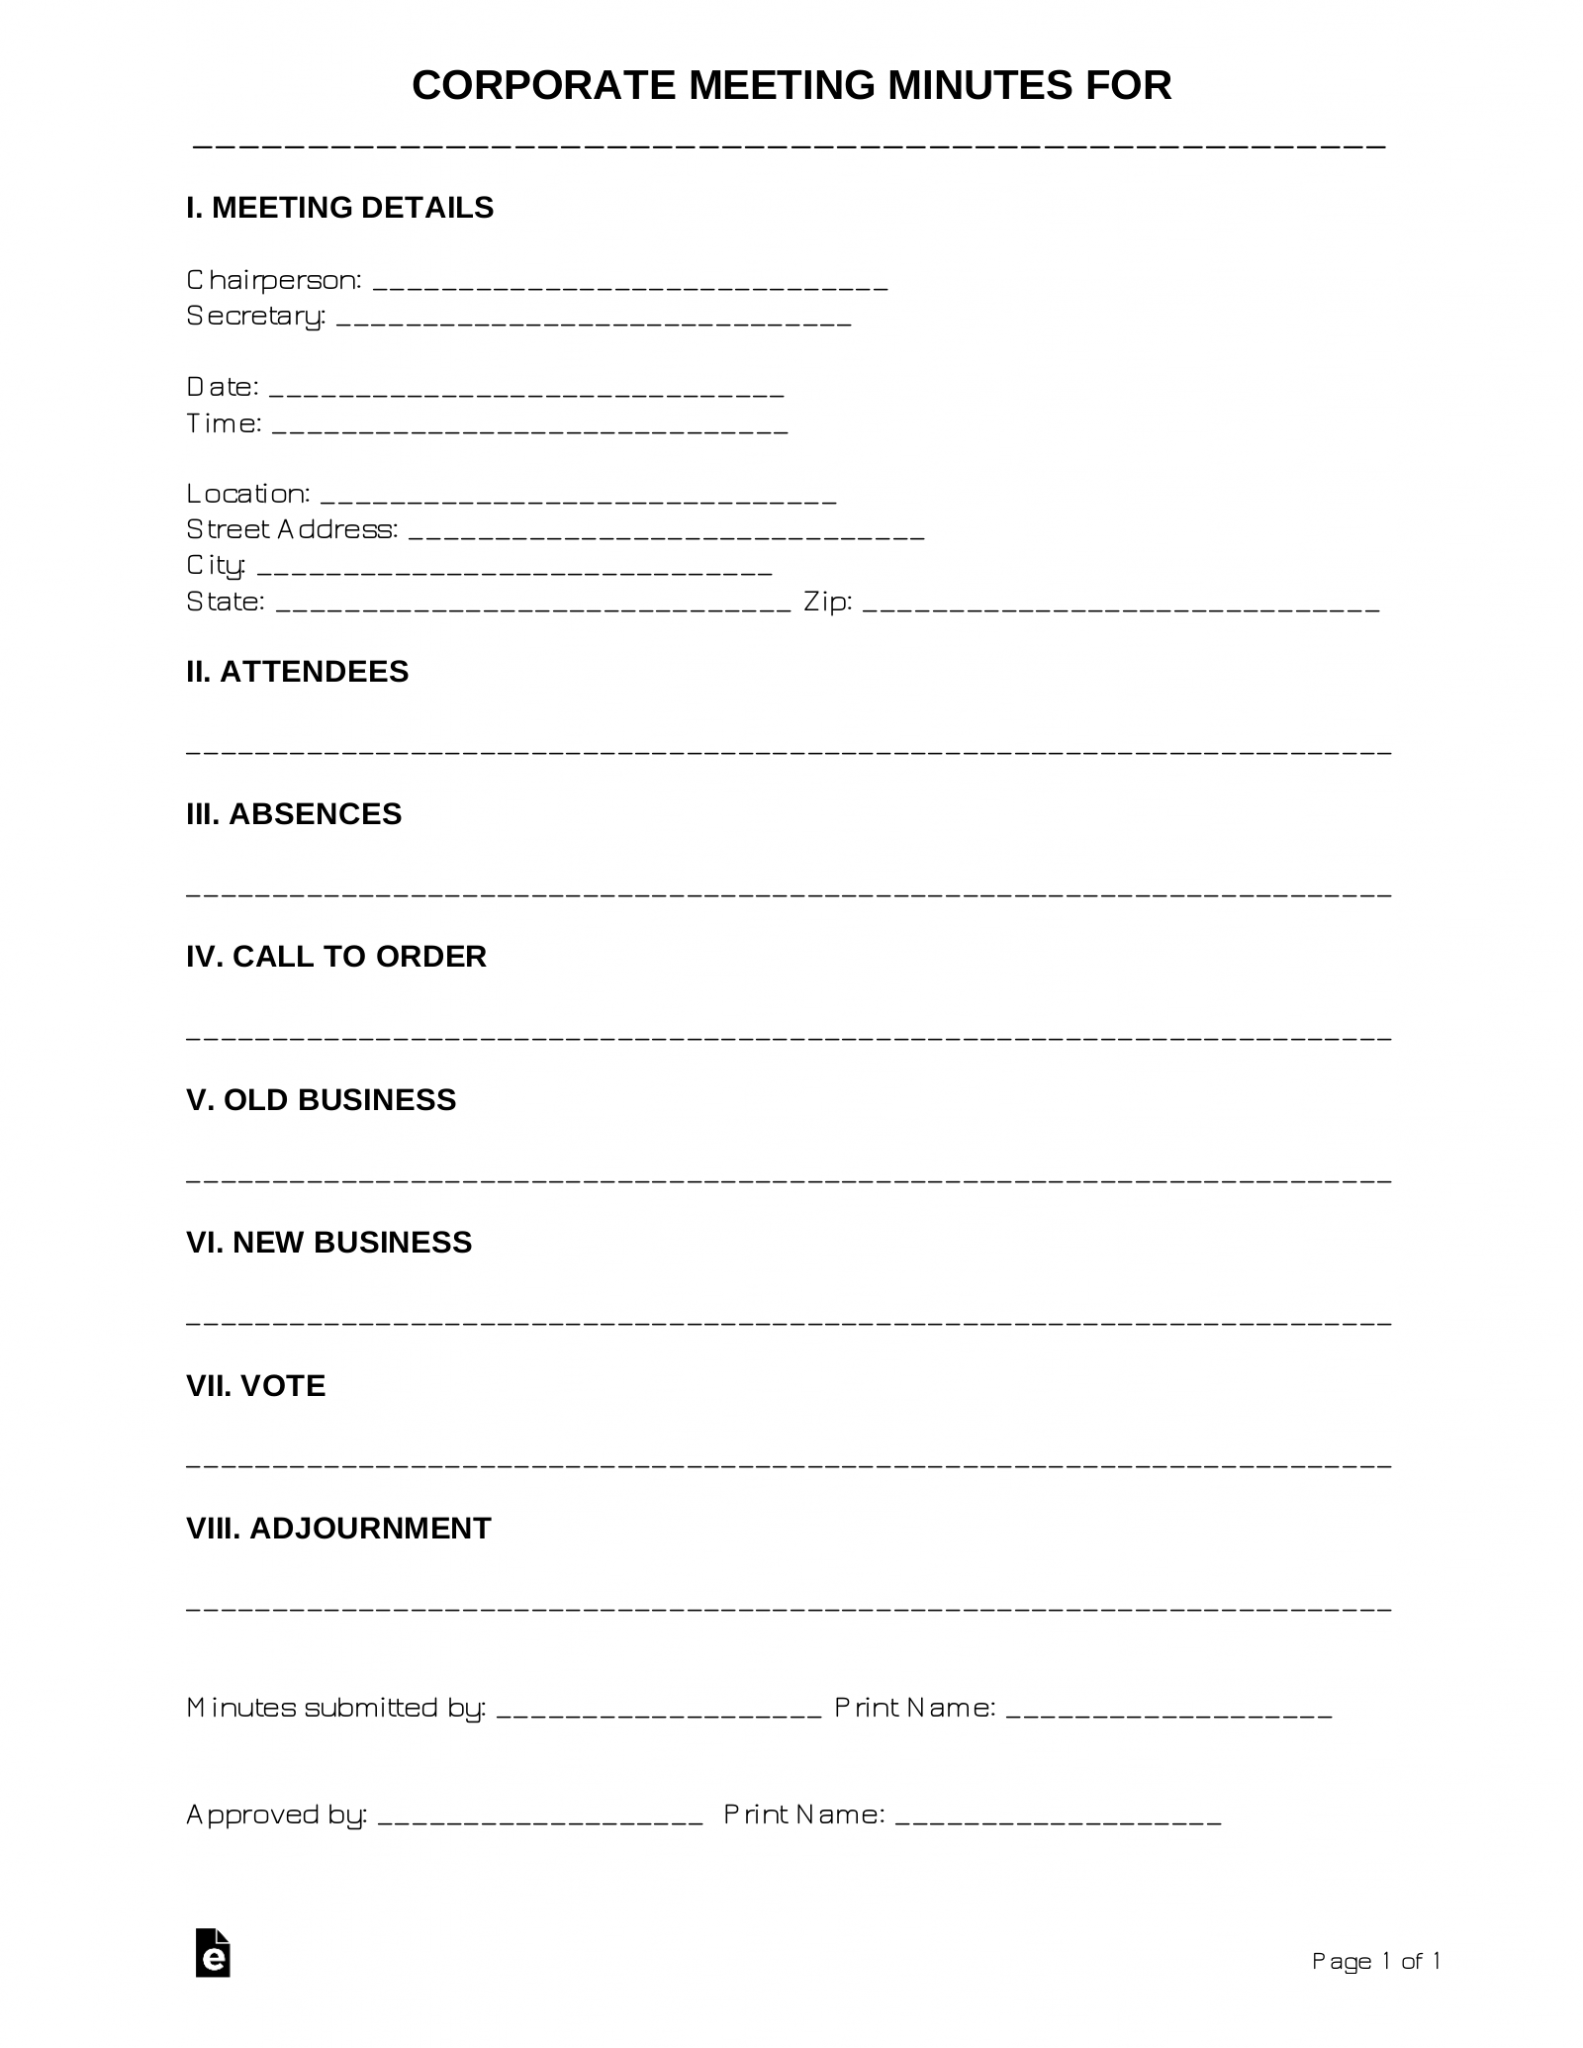 free-meeting-minutes-template-word-riset